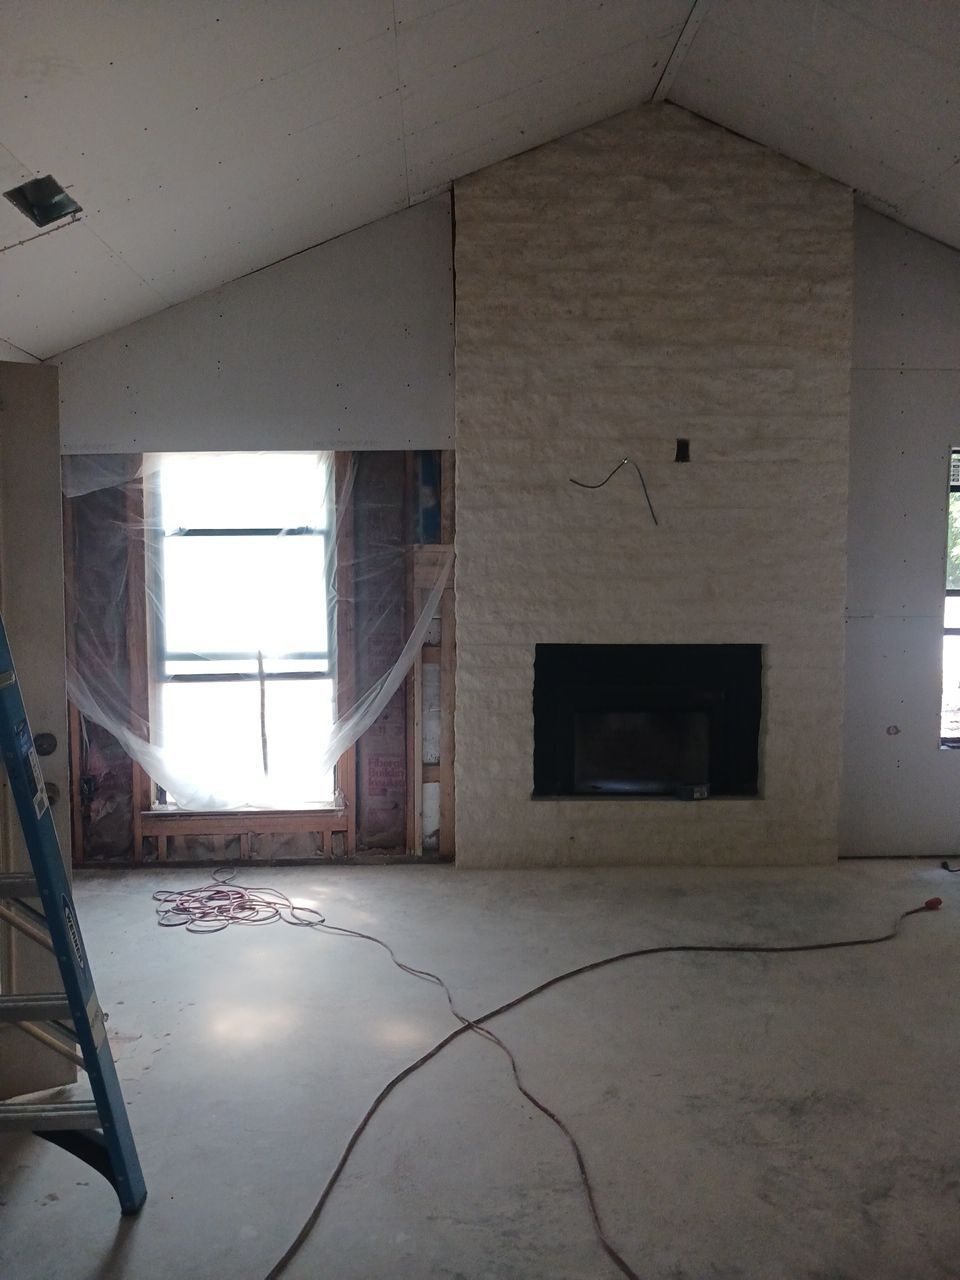 Interior of a room under construction with an unfinished fireplace and a ladder on the side, managed by a General Contractor in McKinney, TX.